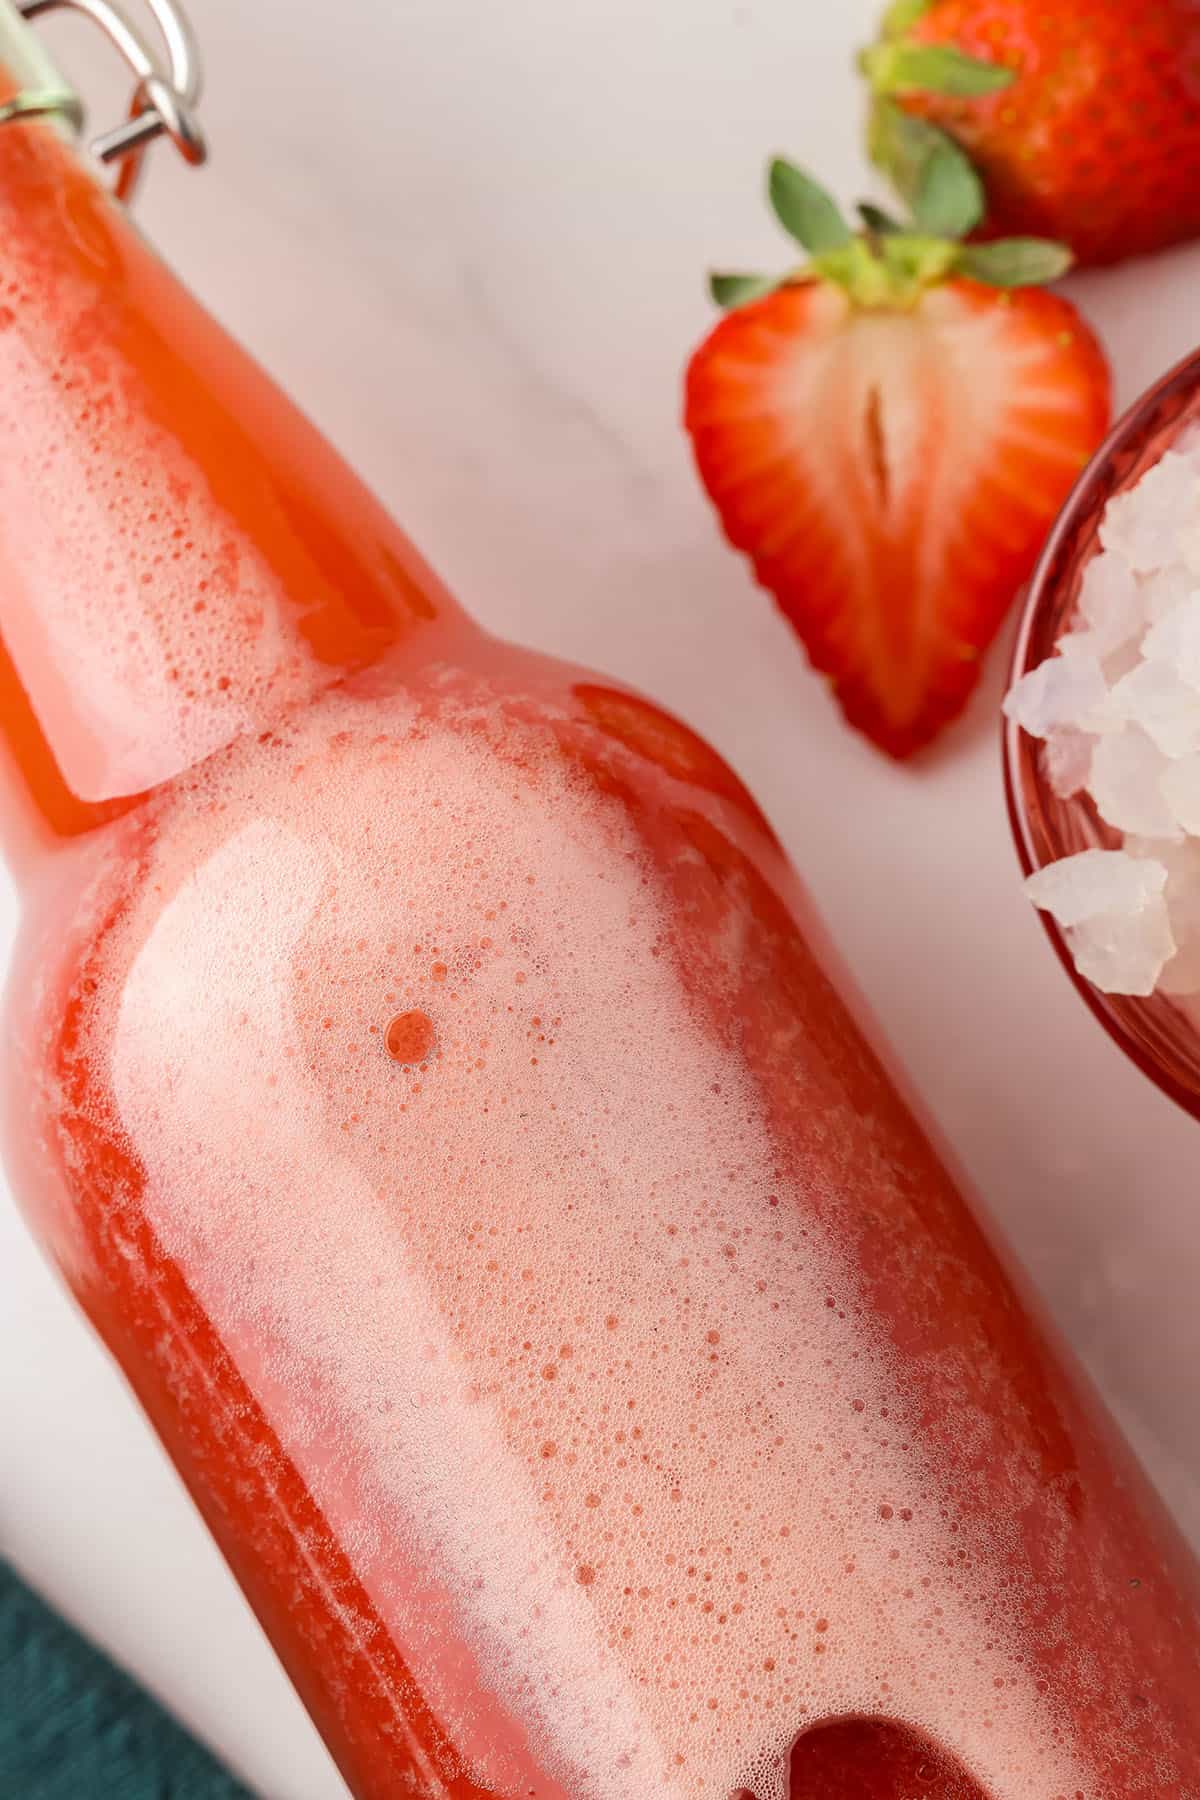 A bottle of strawberry water kefir on its side with fizz formed, surrounded by fresh strawberries. 